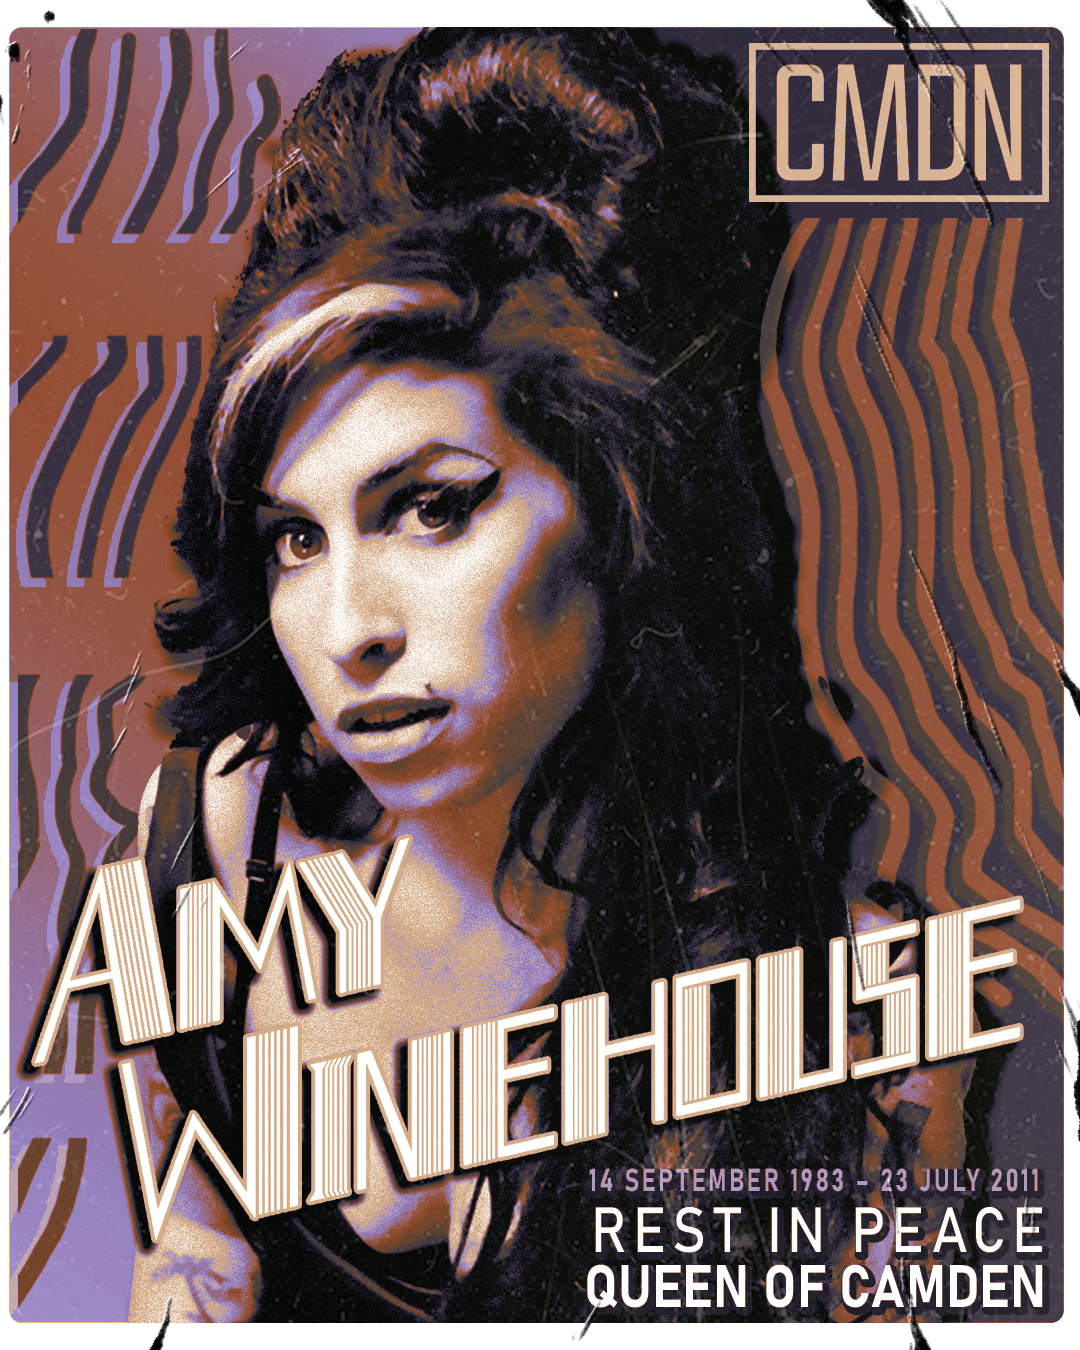 The Queen of Camden: celebrating Amy Winehouse on what would have been her 40th birthday